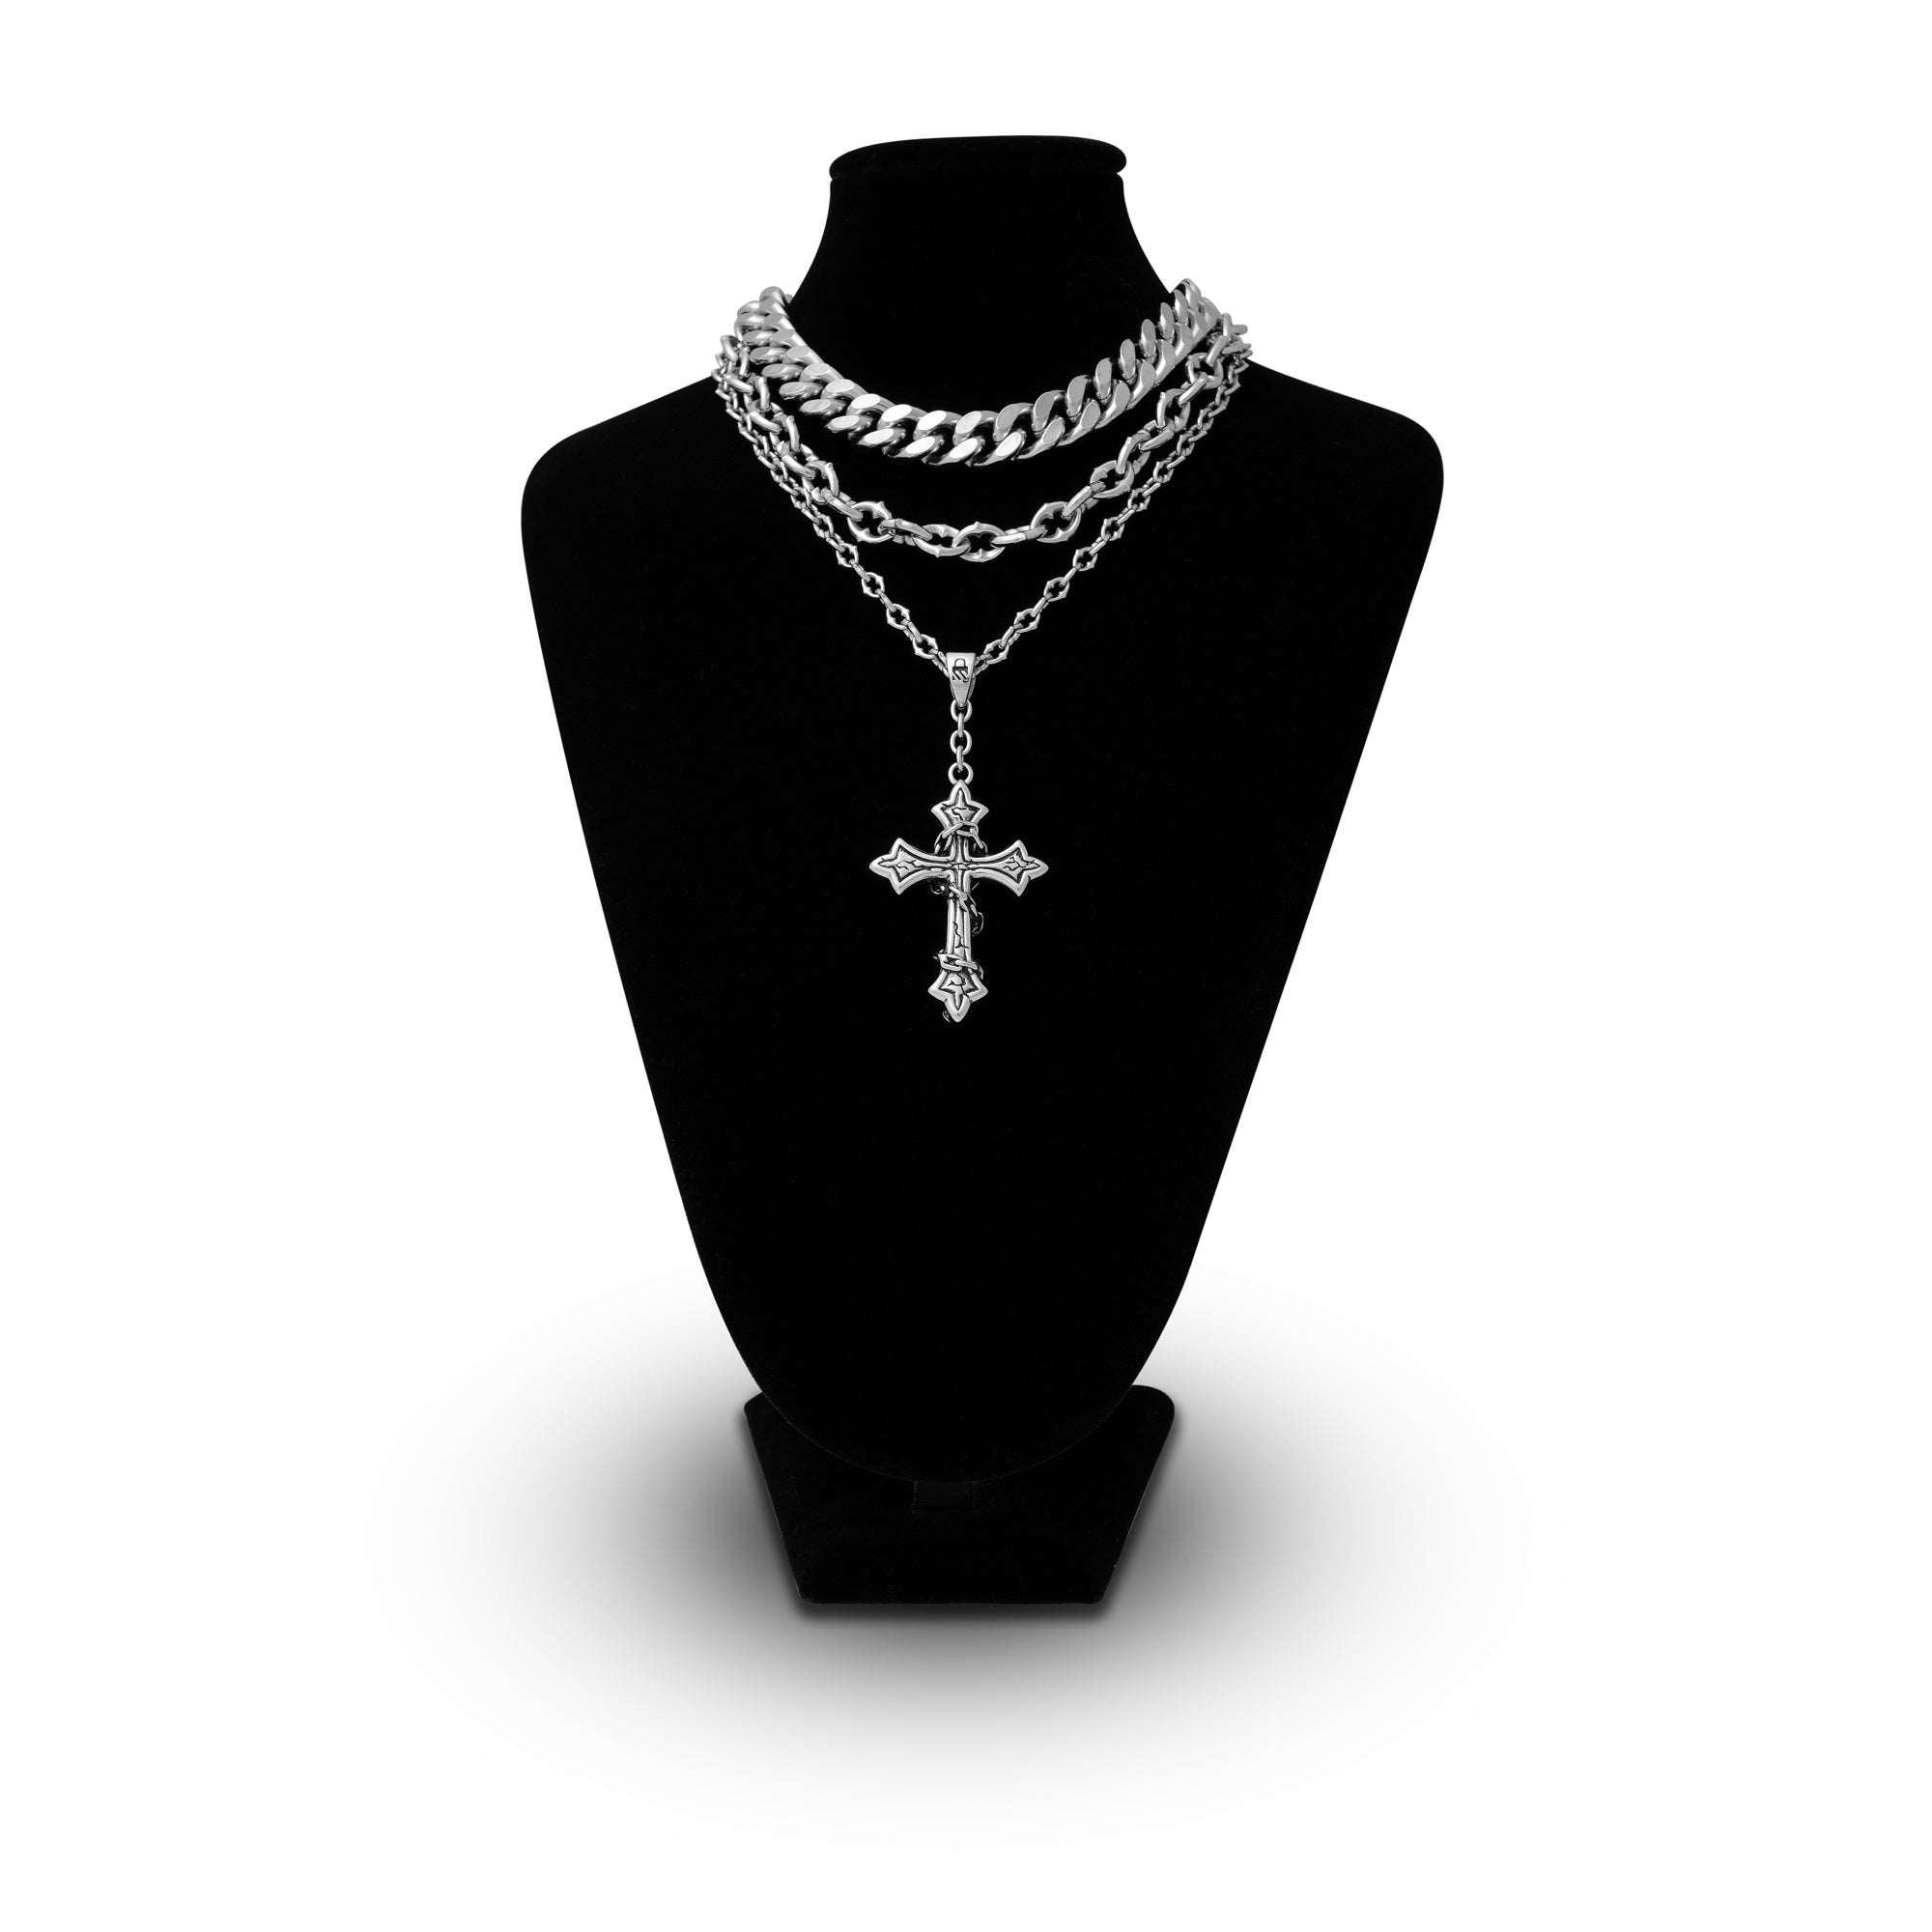 Gothic silver necklace set with spiked chain and cross pendant by statement collective